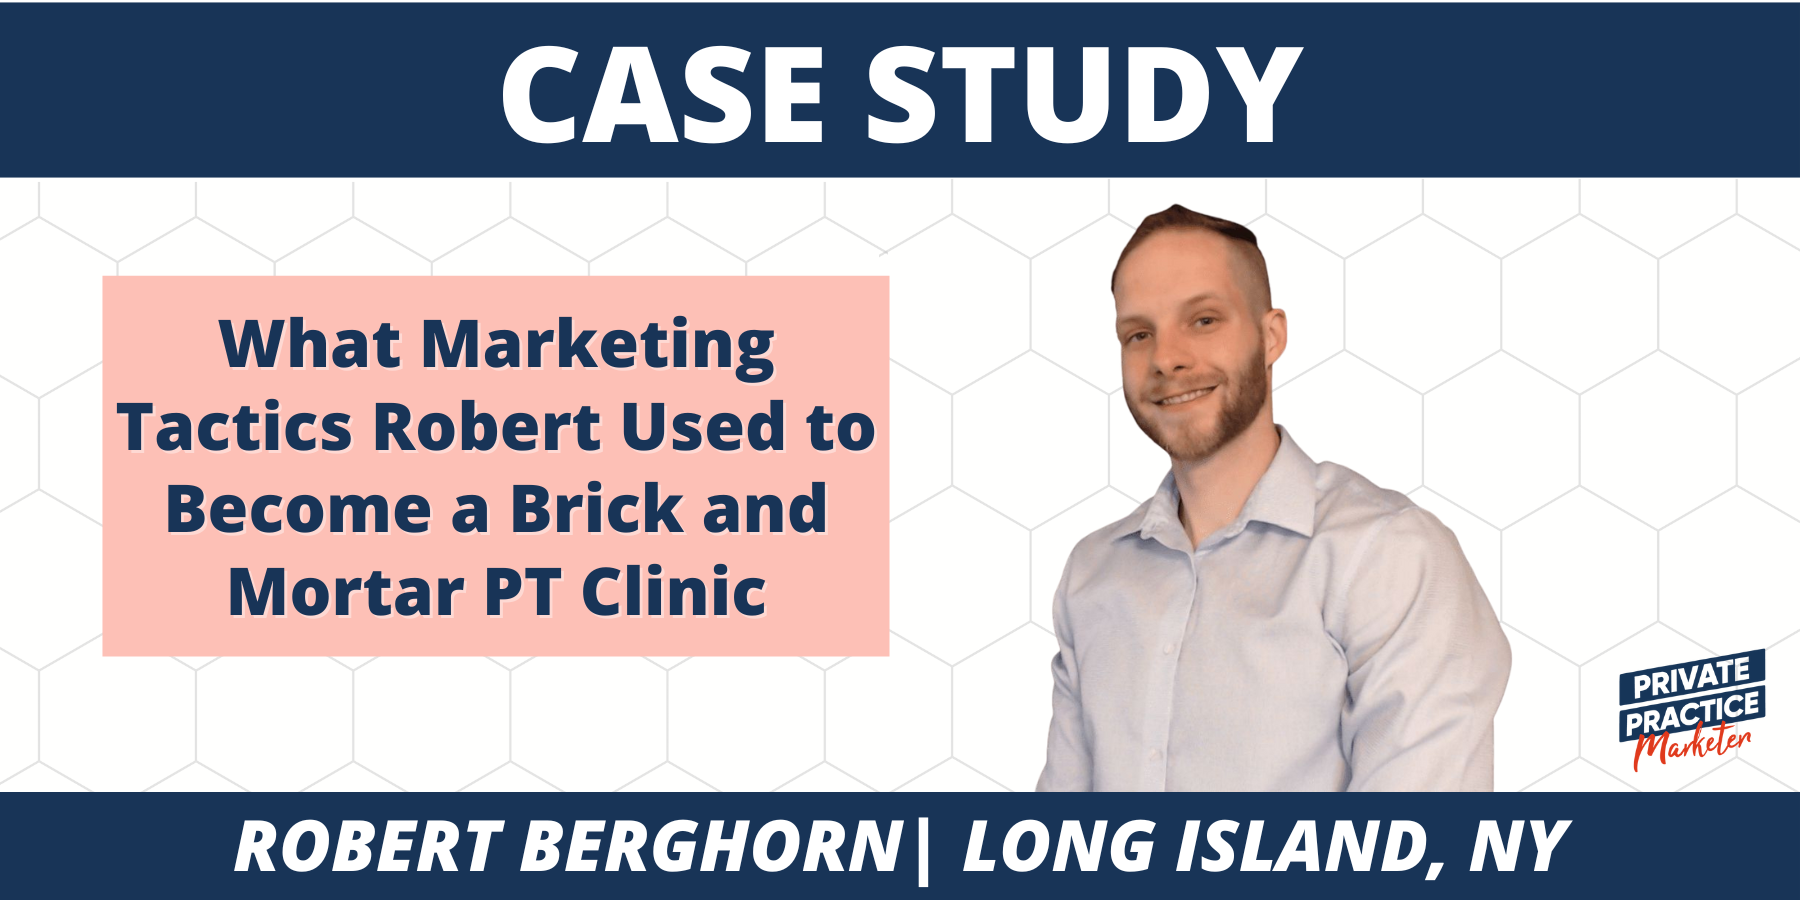 What Marketing Tactics Robert Used to Become a Brick and Mortar PT Clinic